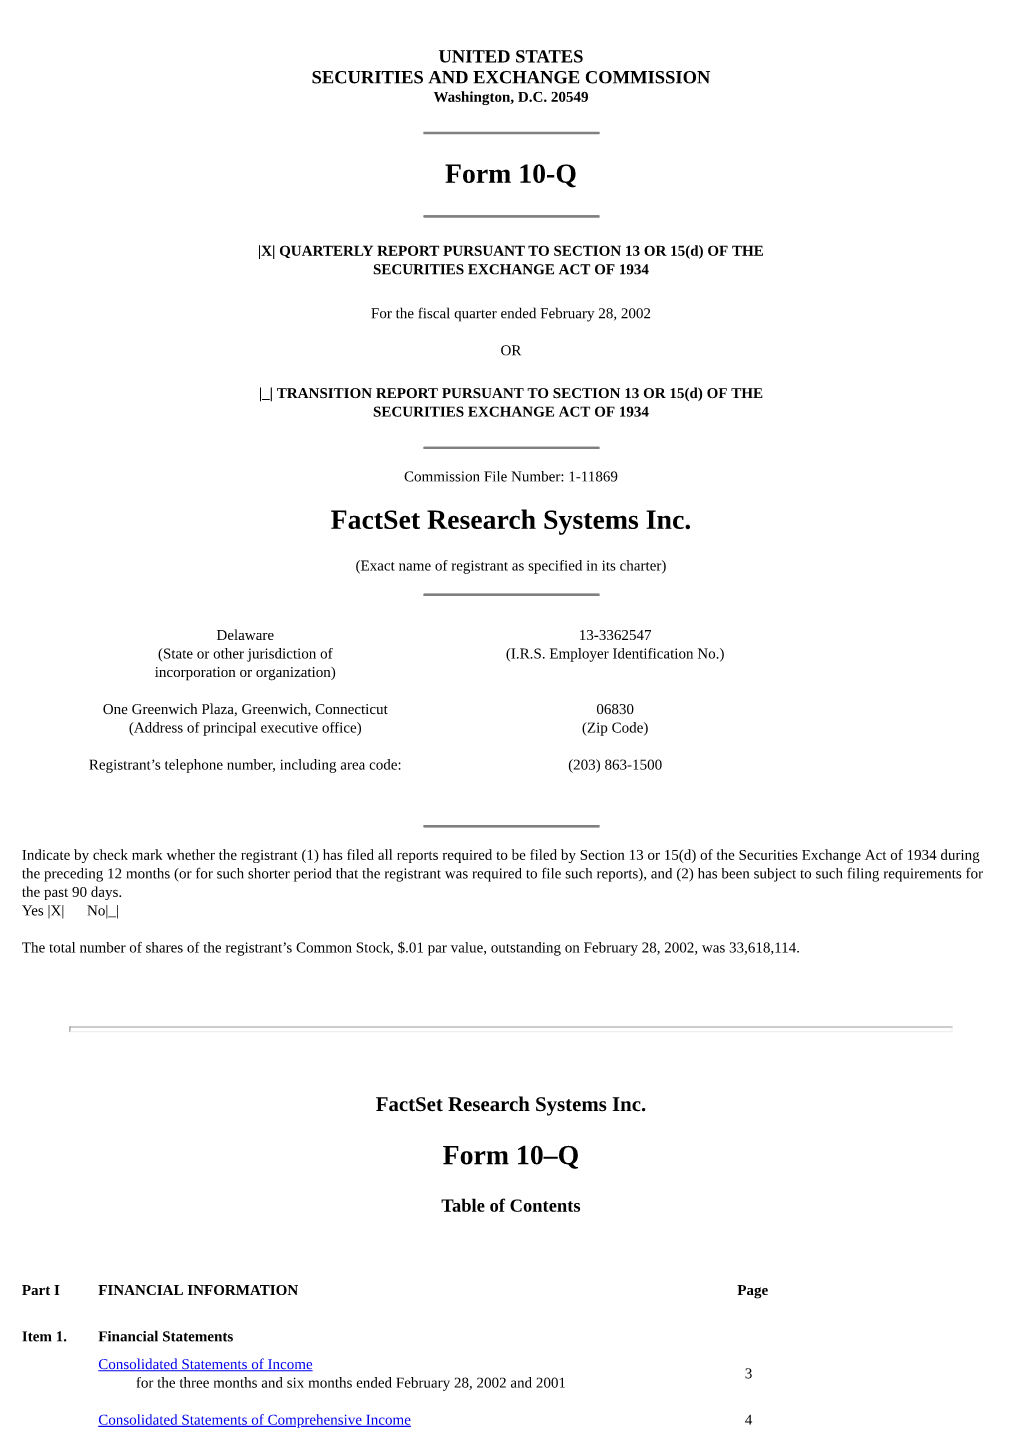 Form 10-Q Factset Research Systems Inc